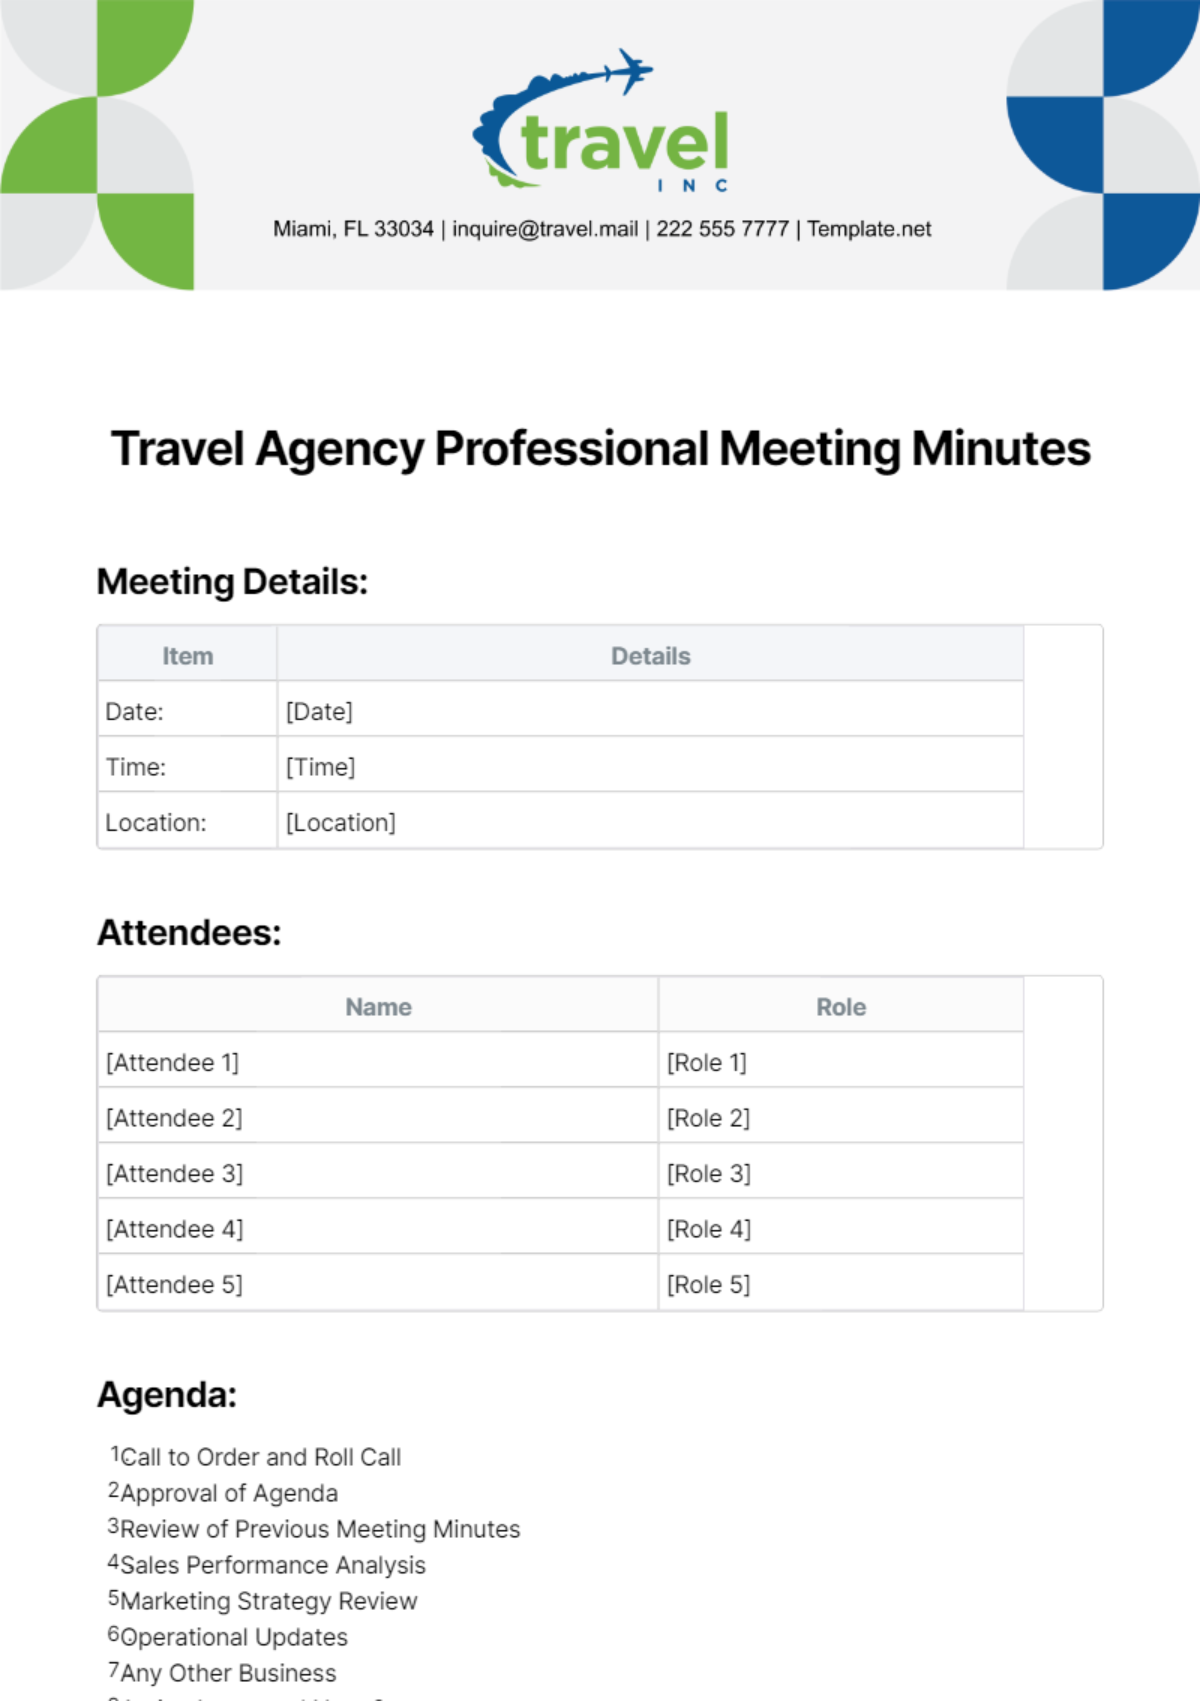 Free Travel Agency Professional Meeting Minutes Template